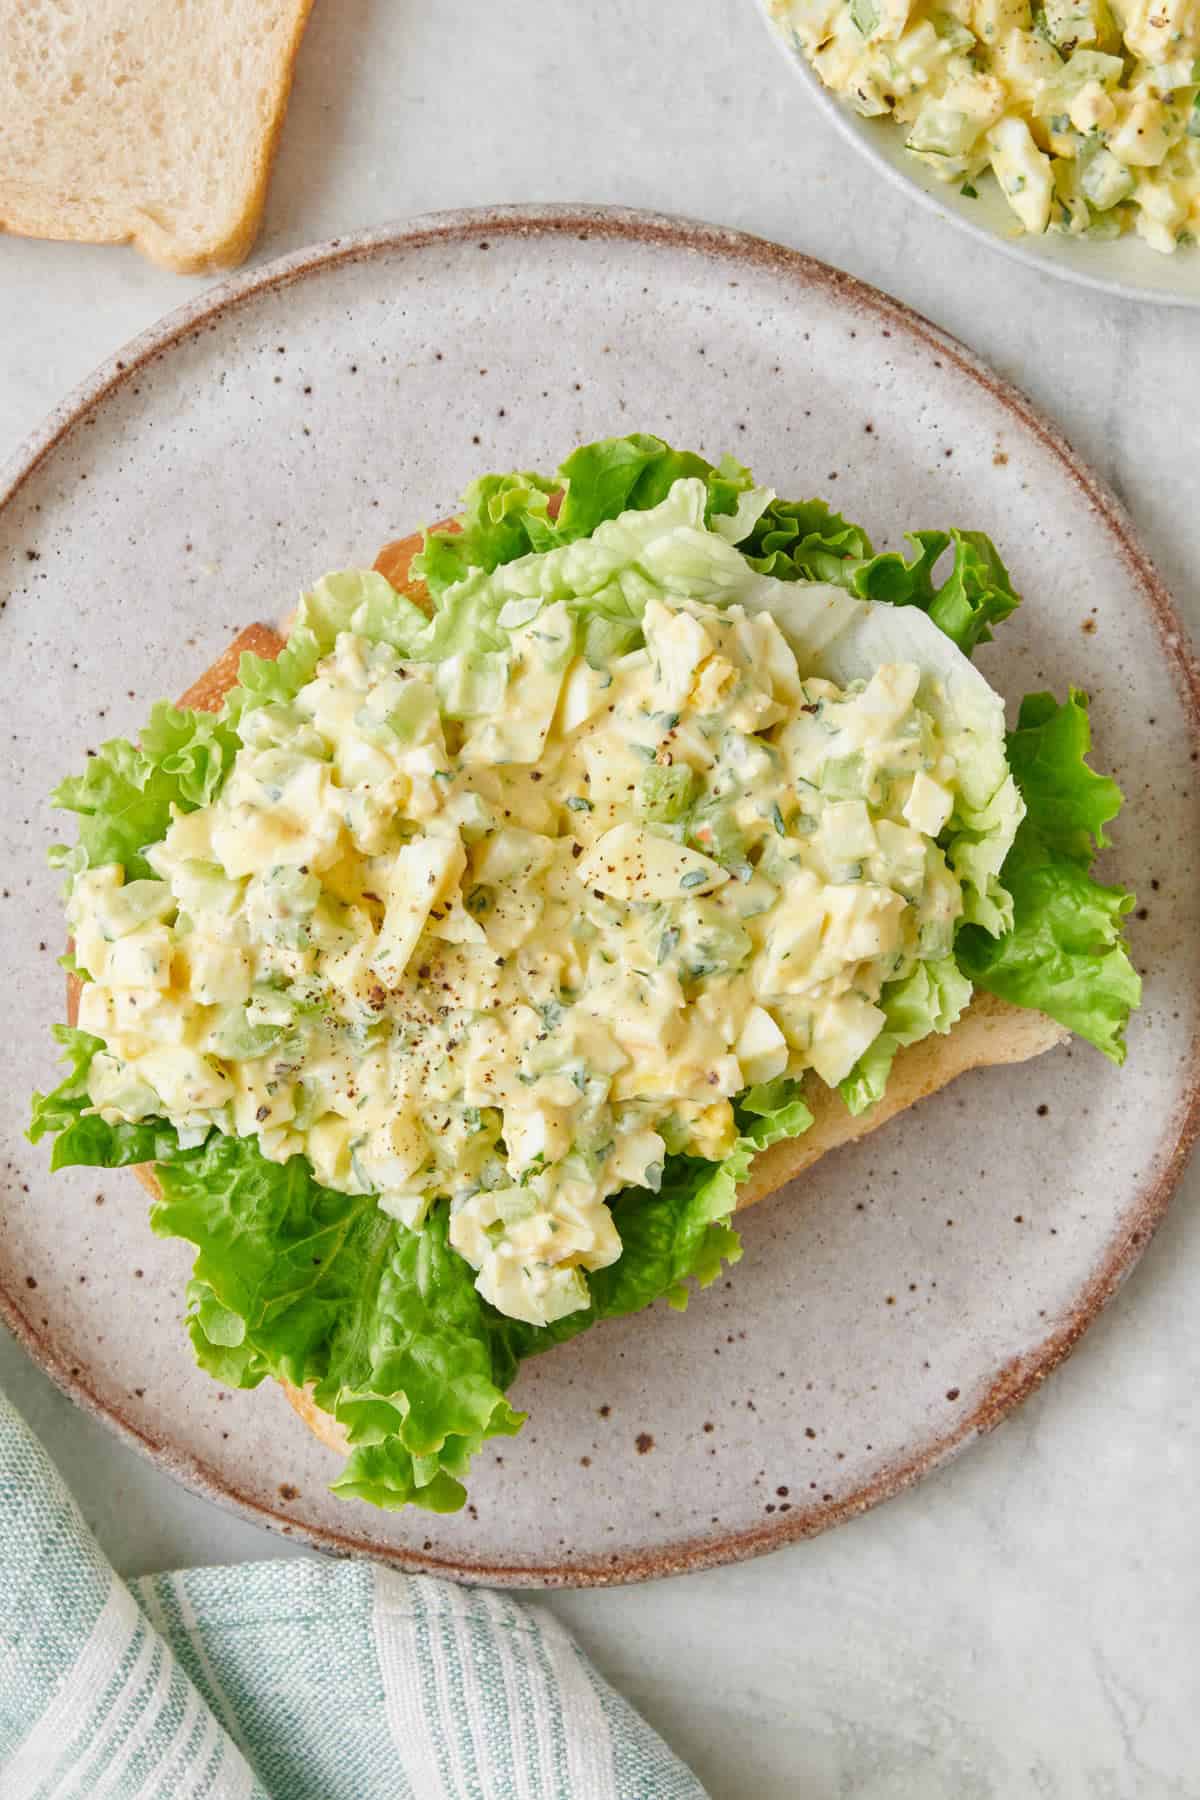 Egg salad on an open faced sandwich with lettuce.